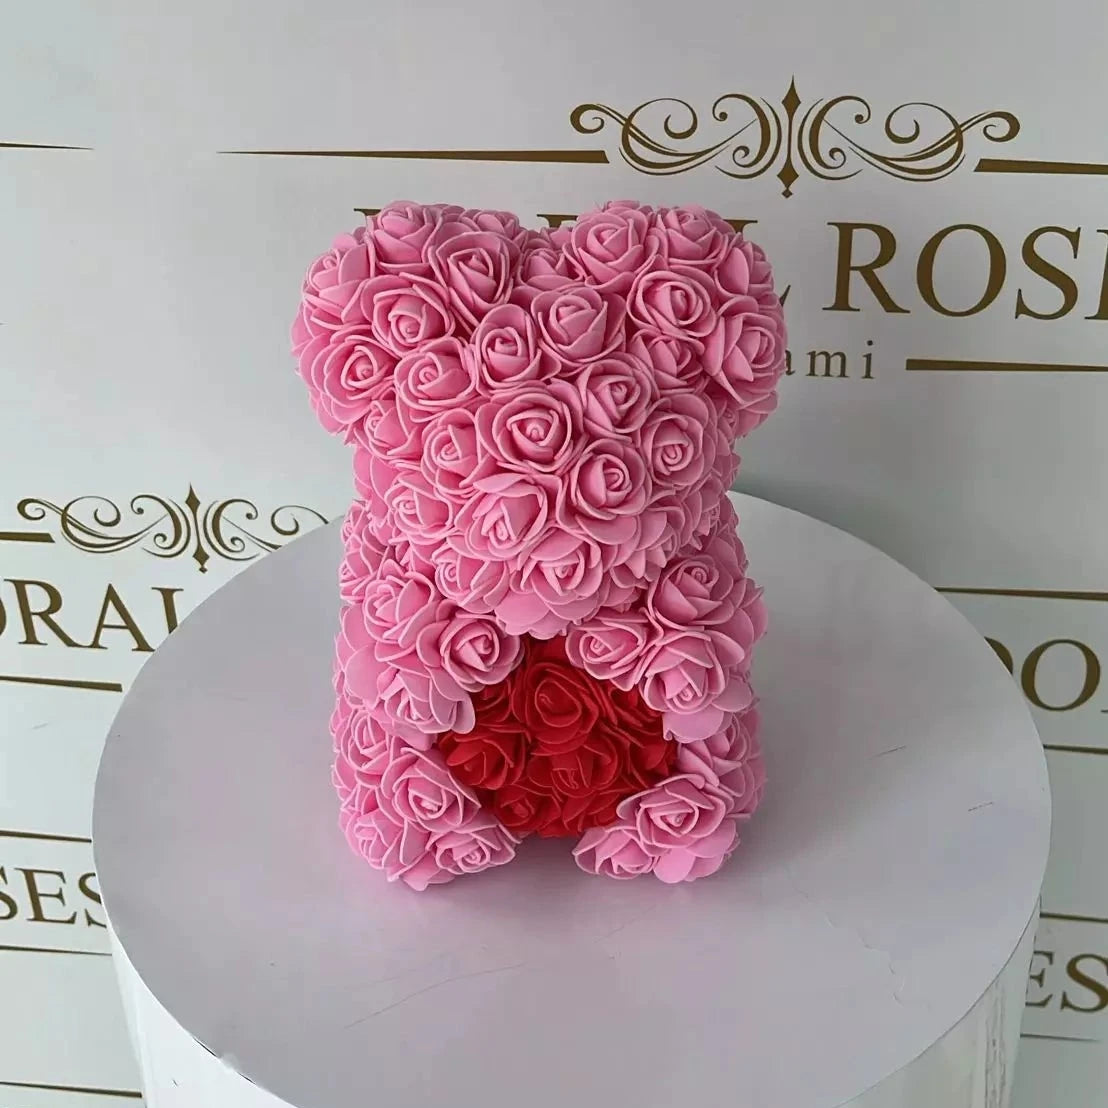 Introducing Teddy Bear Gifts Online! Pink, Enjoy a wide variety of colors with our anti-allergic teddy bears, Gifts and flowers delivery in Miami, Fl Doral Roses Miami